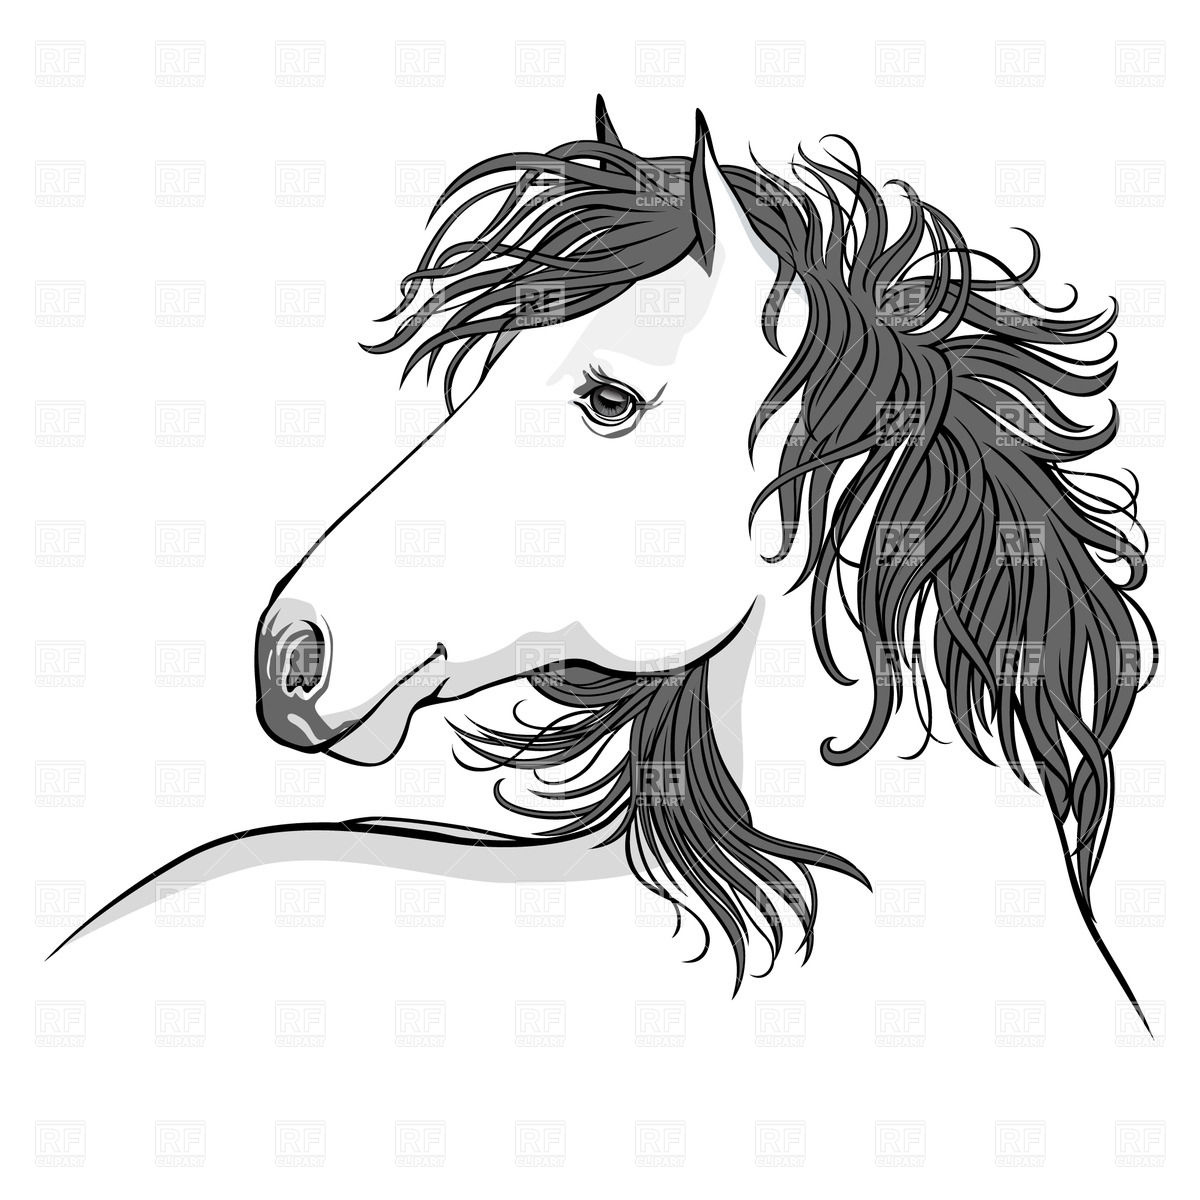 Sketchy Hand Drawn Horse Download Royalty Free Vector Clipart  Eps